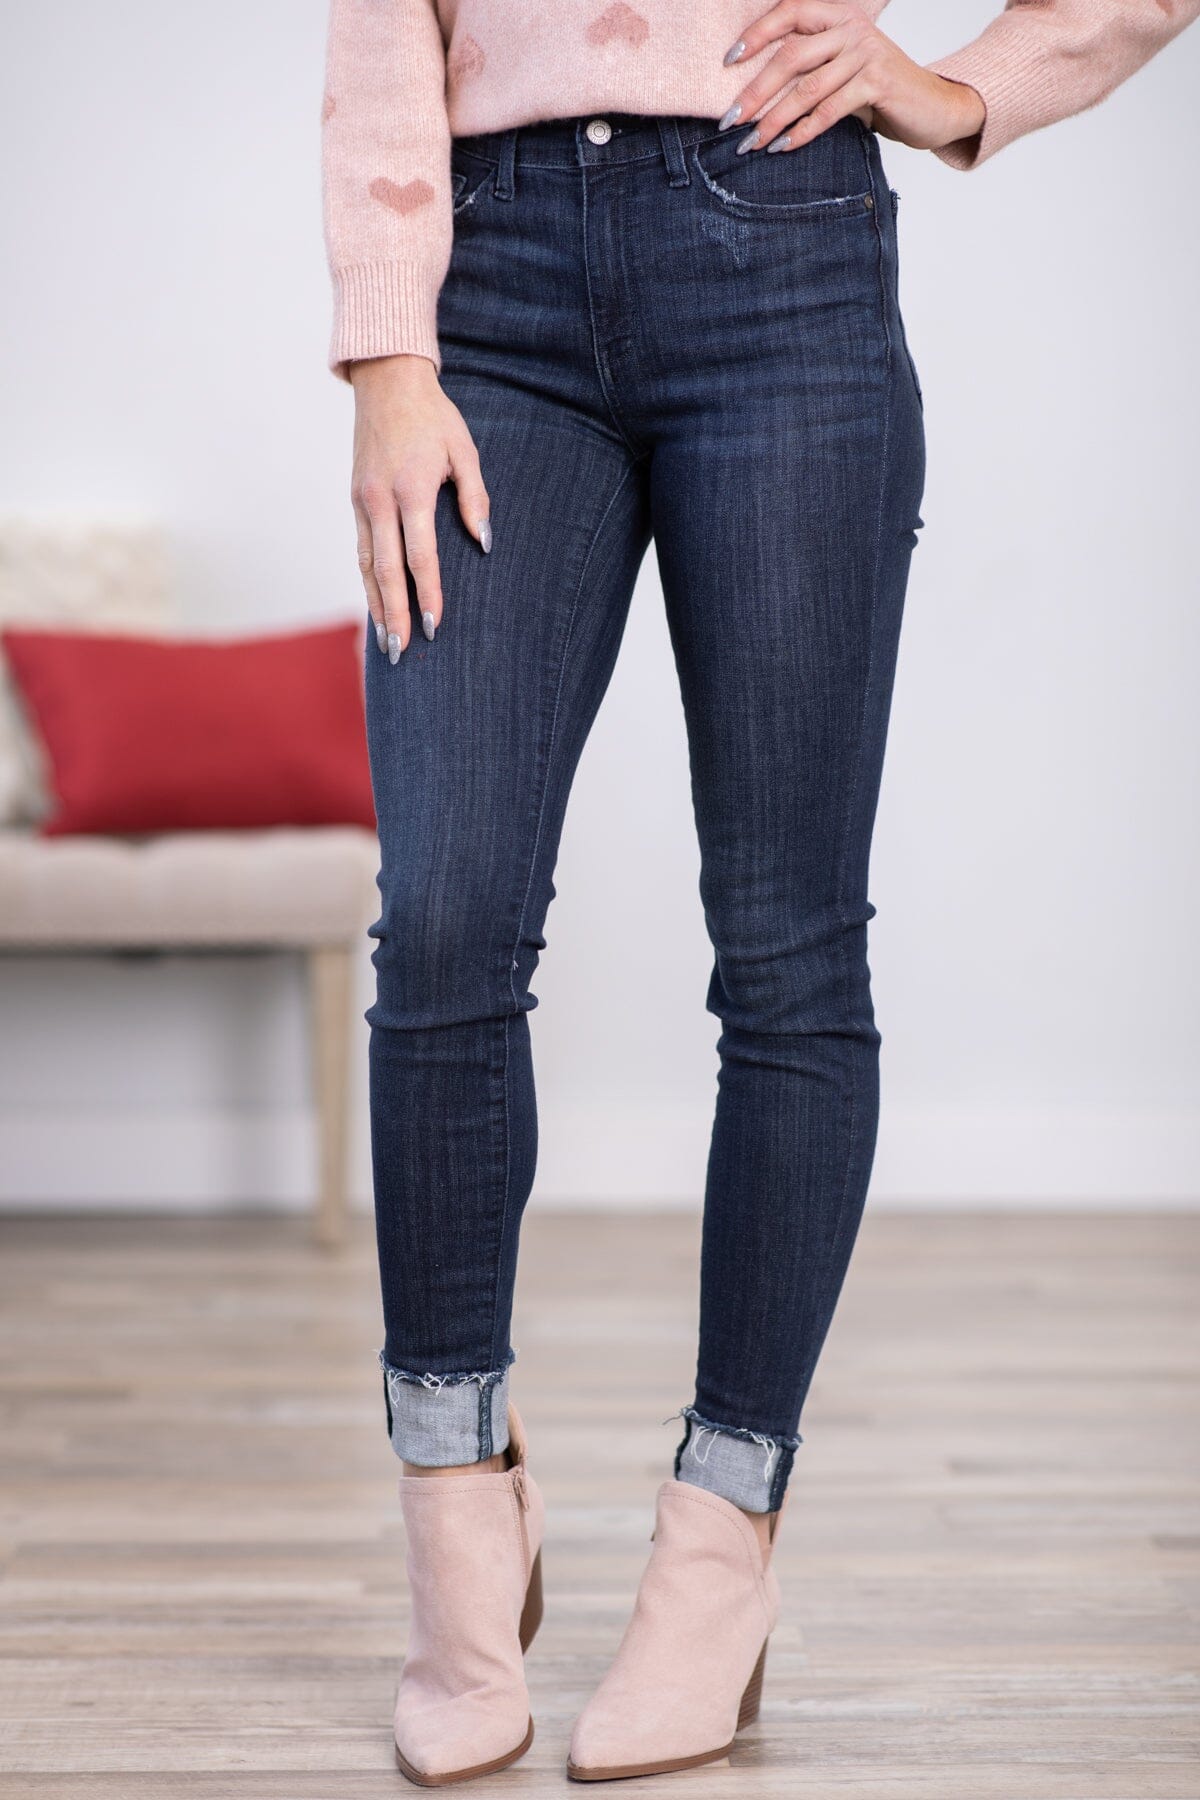 How to cuff jeans (8 common ways). Denim FAQ by Denimhunters